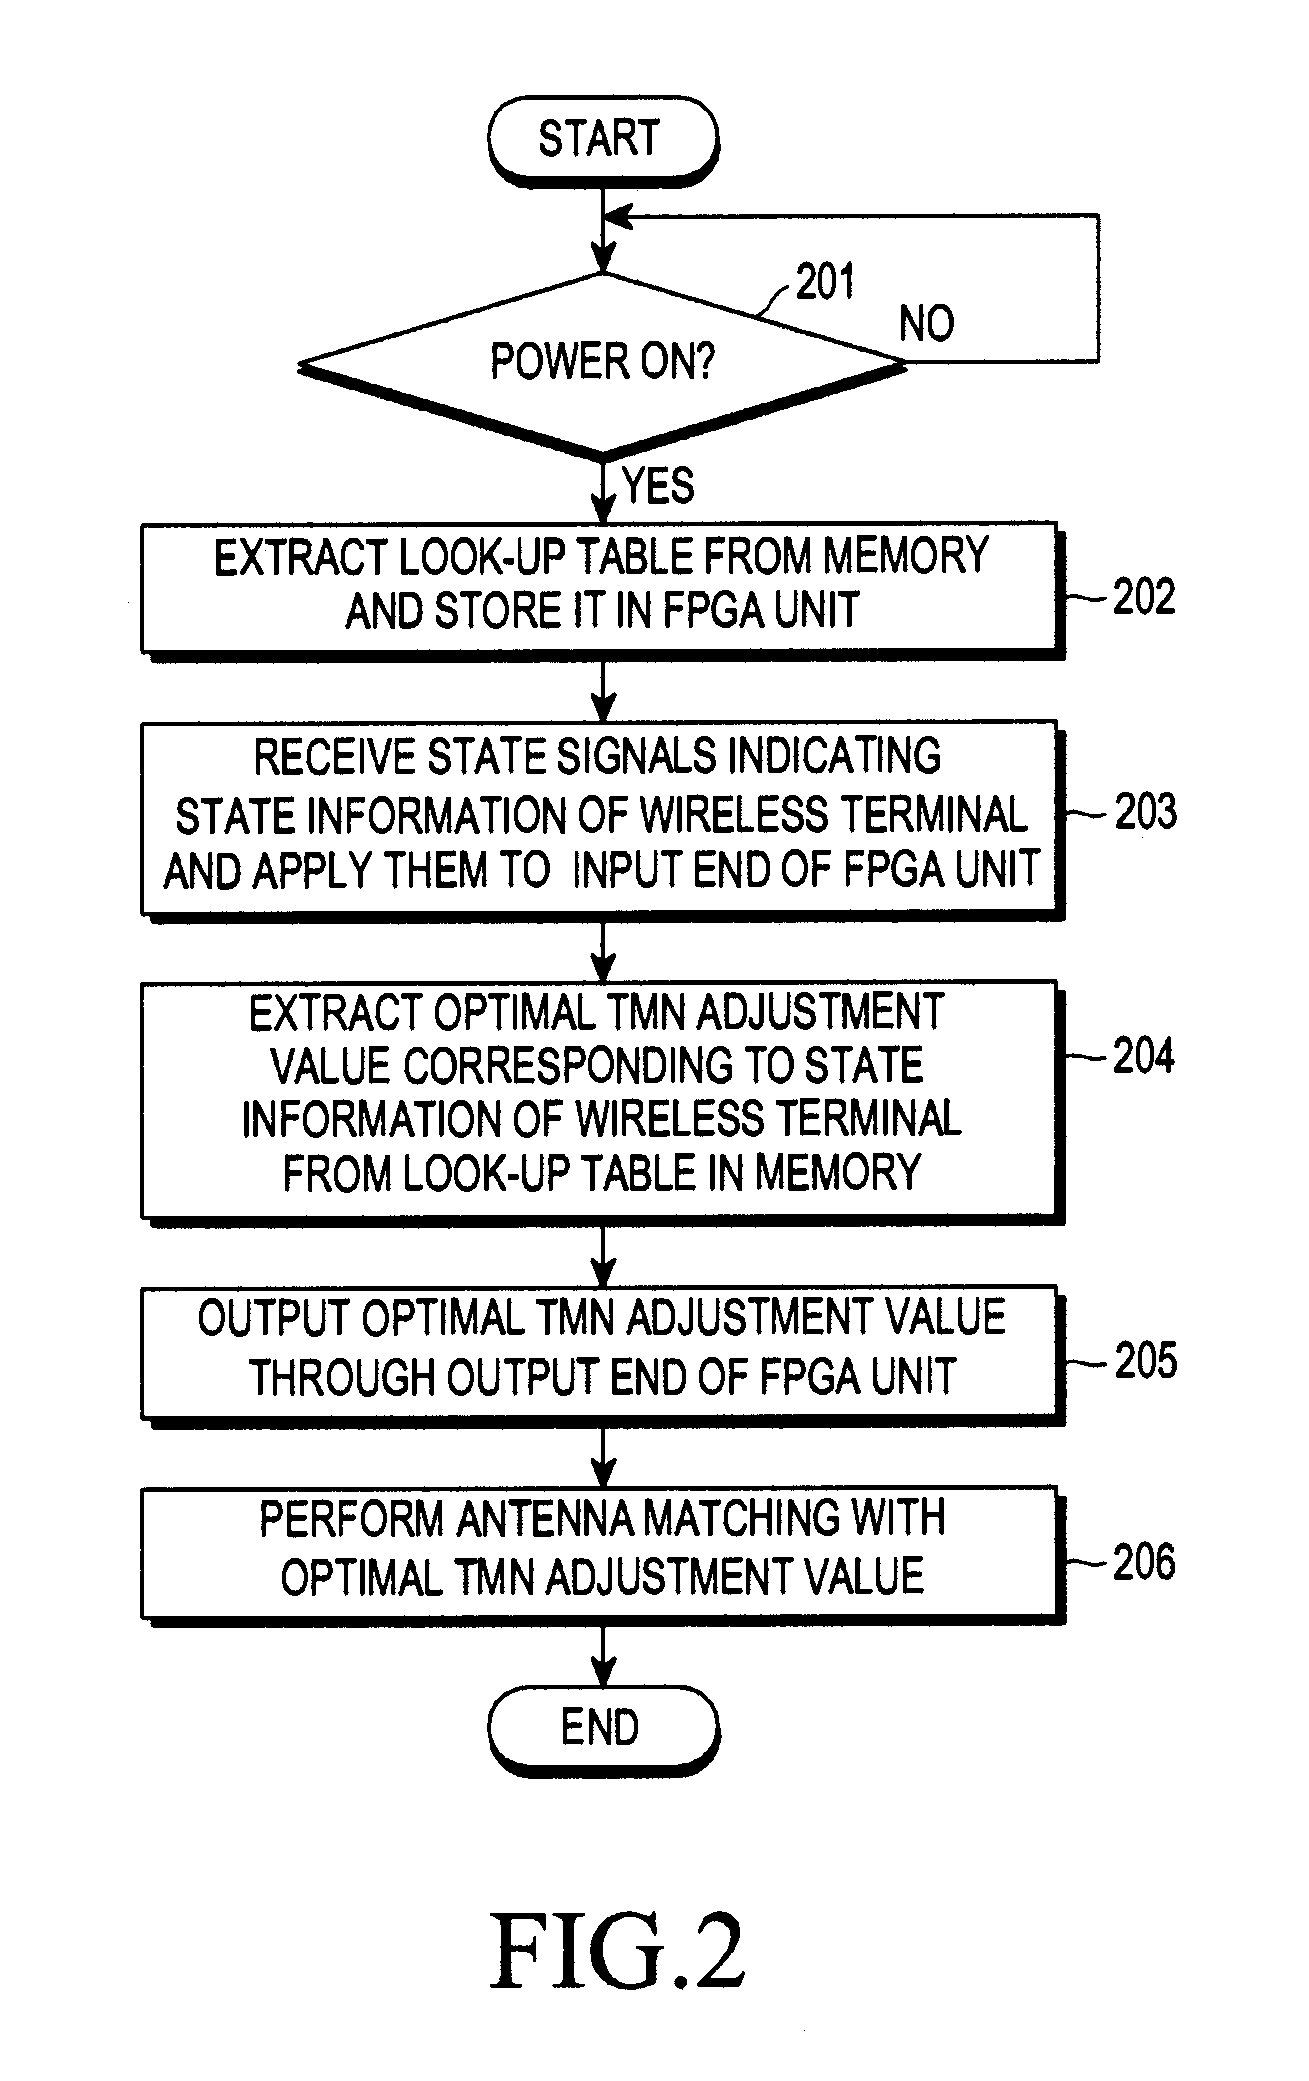 Apparatus and method for matching antenna in wireless terminal